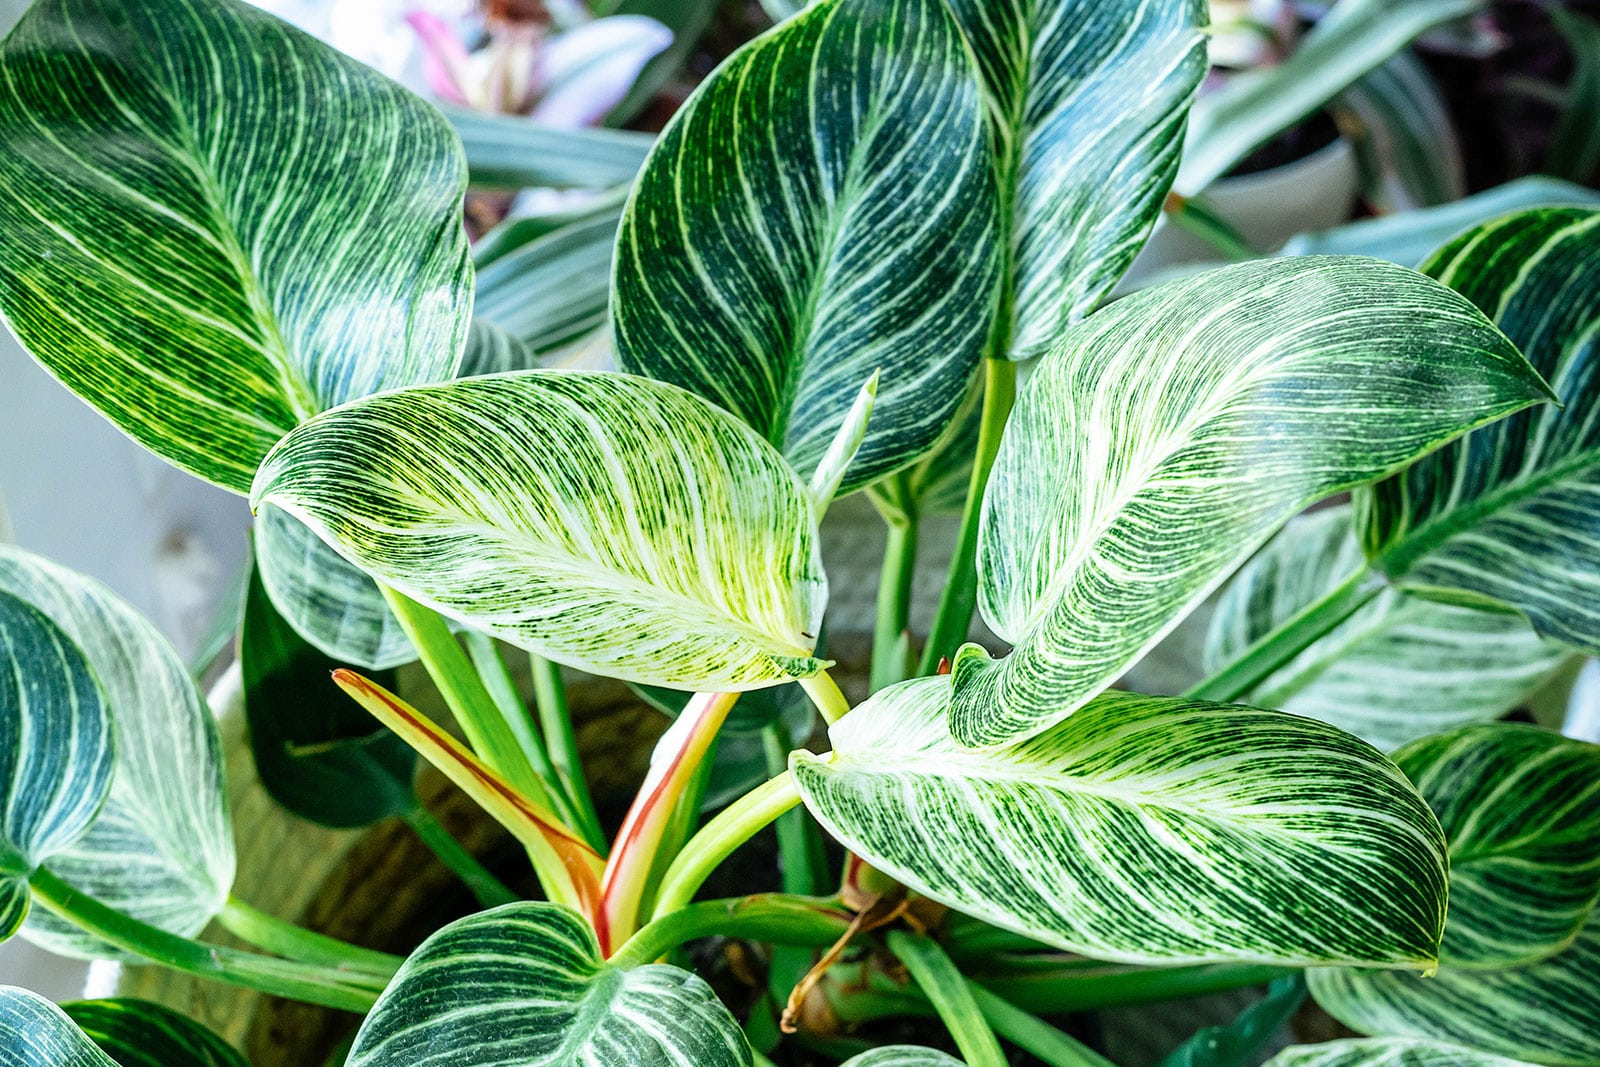 Philodendron White Wave houseplant with dark green and white variegation